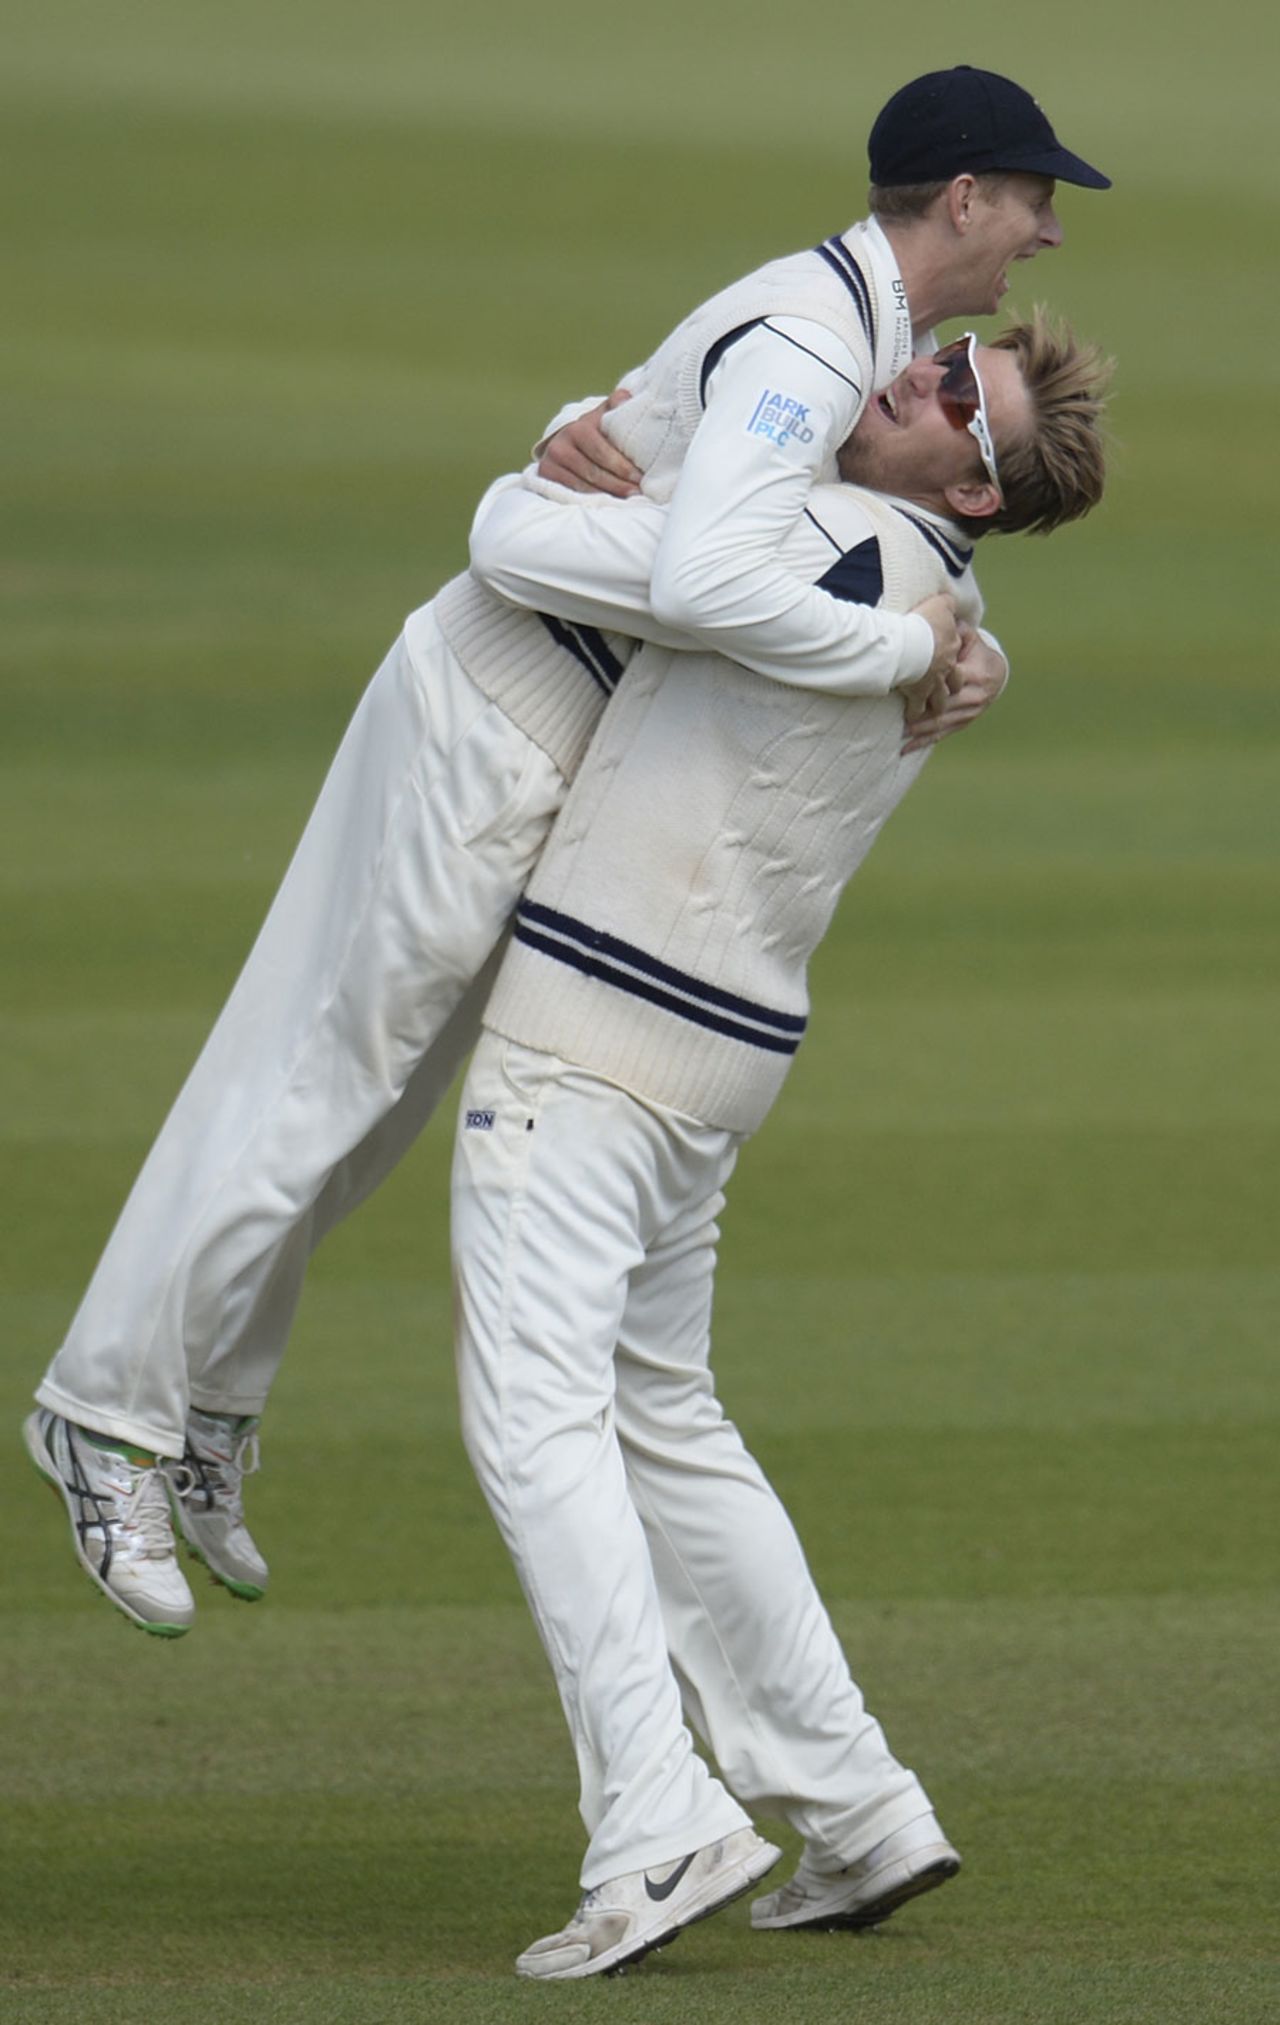 Adam Voges and Ollie Rayner celebrate the wicket of Kumar Sangakkara, Surrey v Middlesex, County Championship, Division One, Kia Oval, 2nd day, May 16, 2016